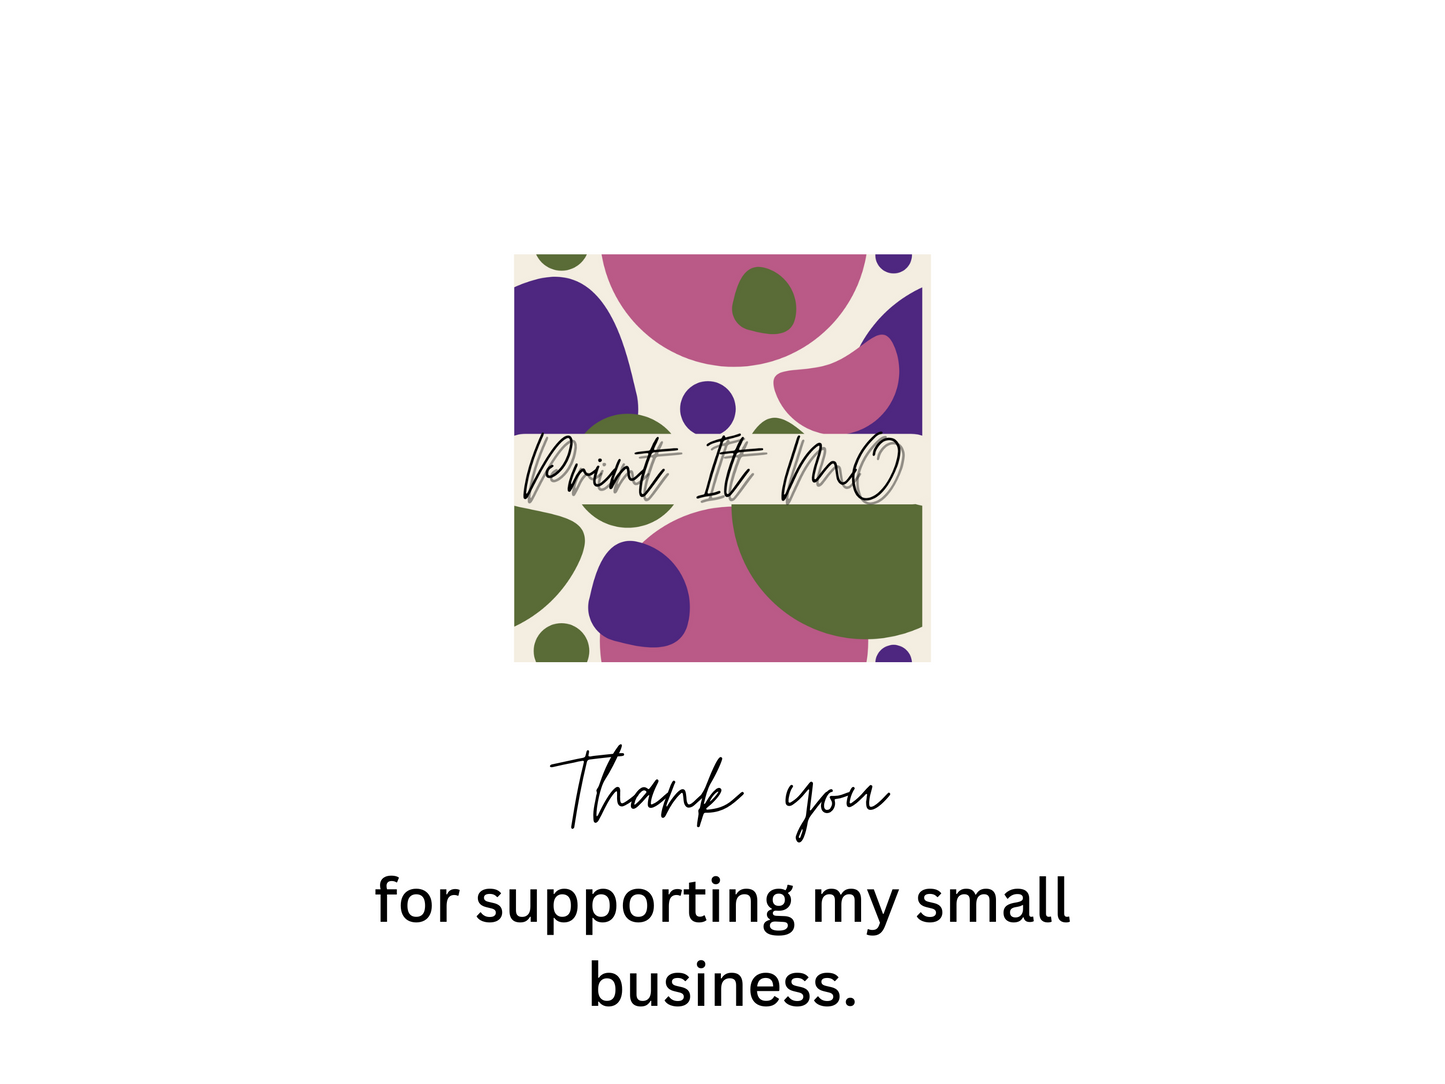 Print It Mo logo and thank you message.